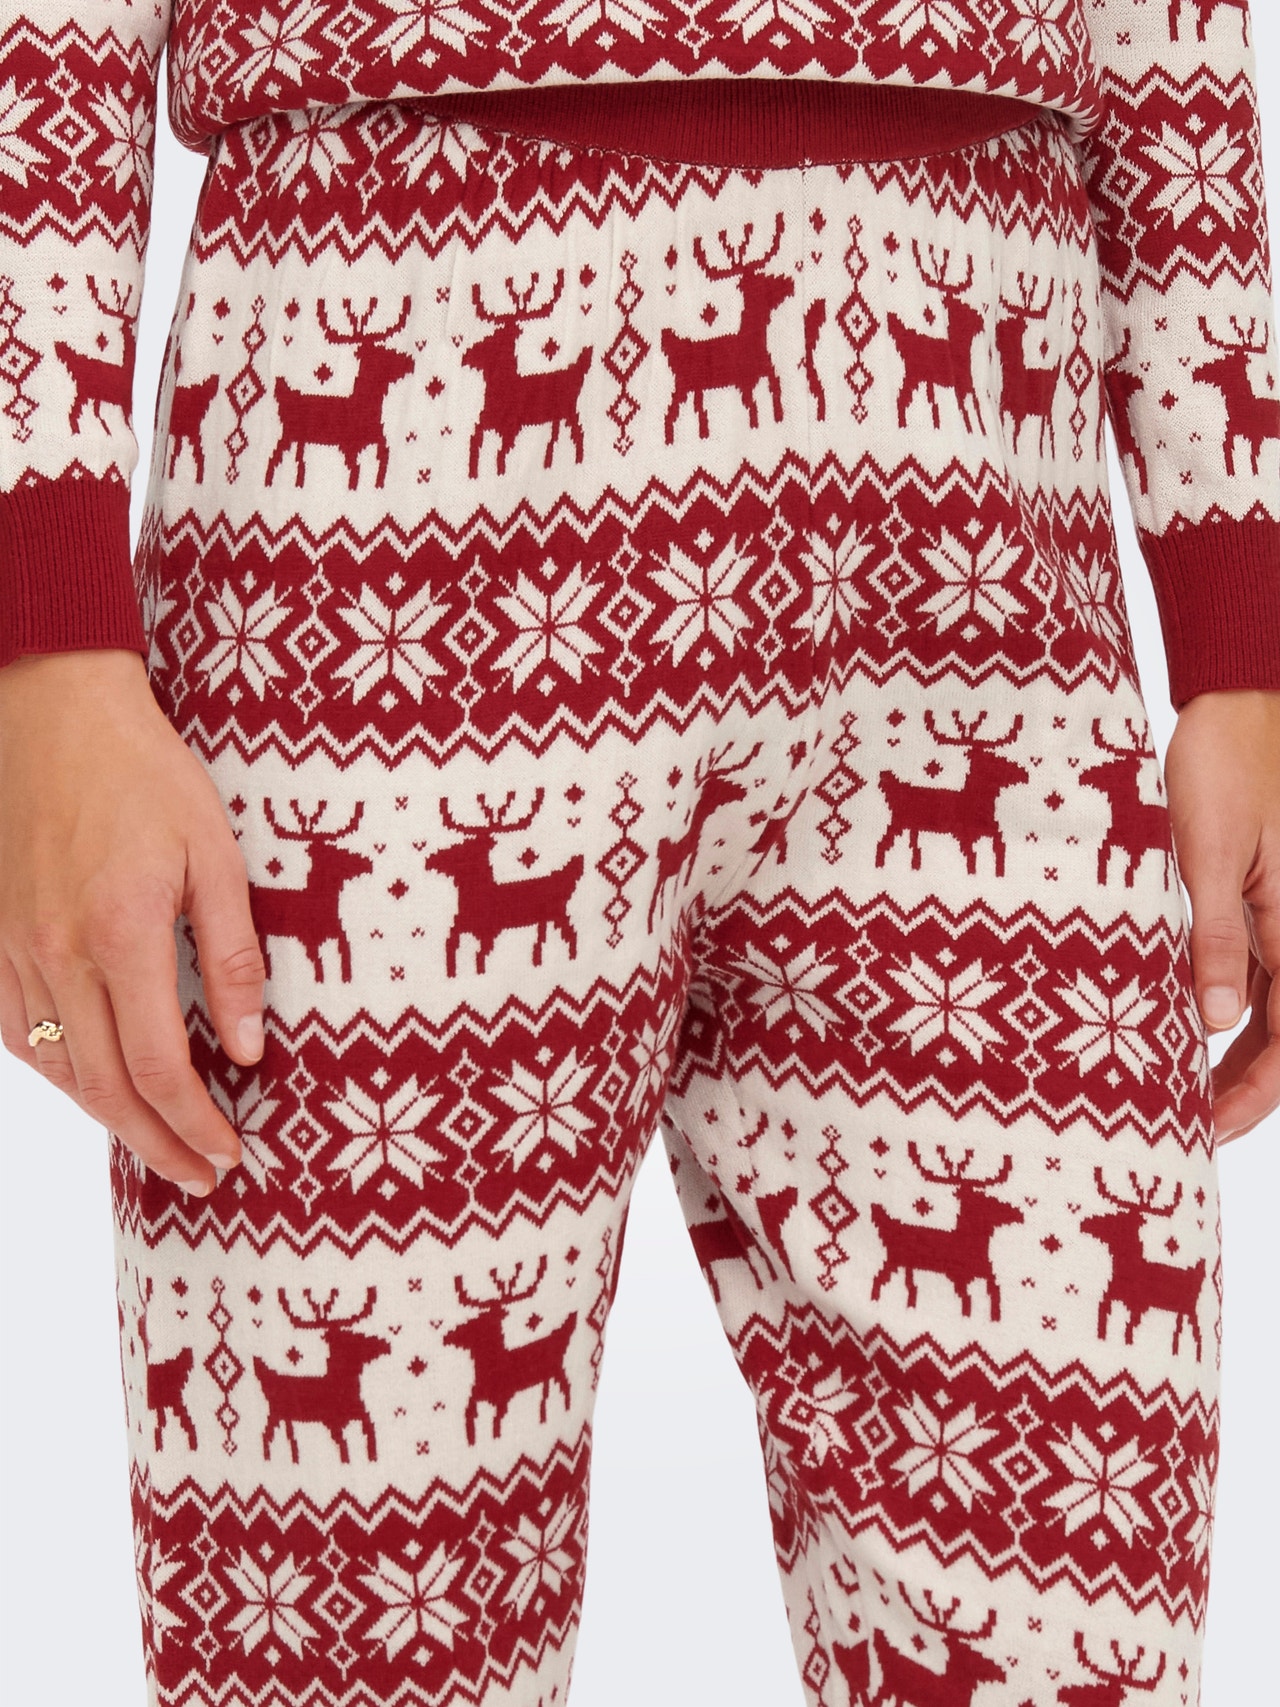 ONLY Knitted X-mas Trousers -Chili Pepper - 15272160